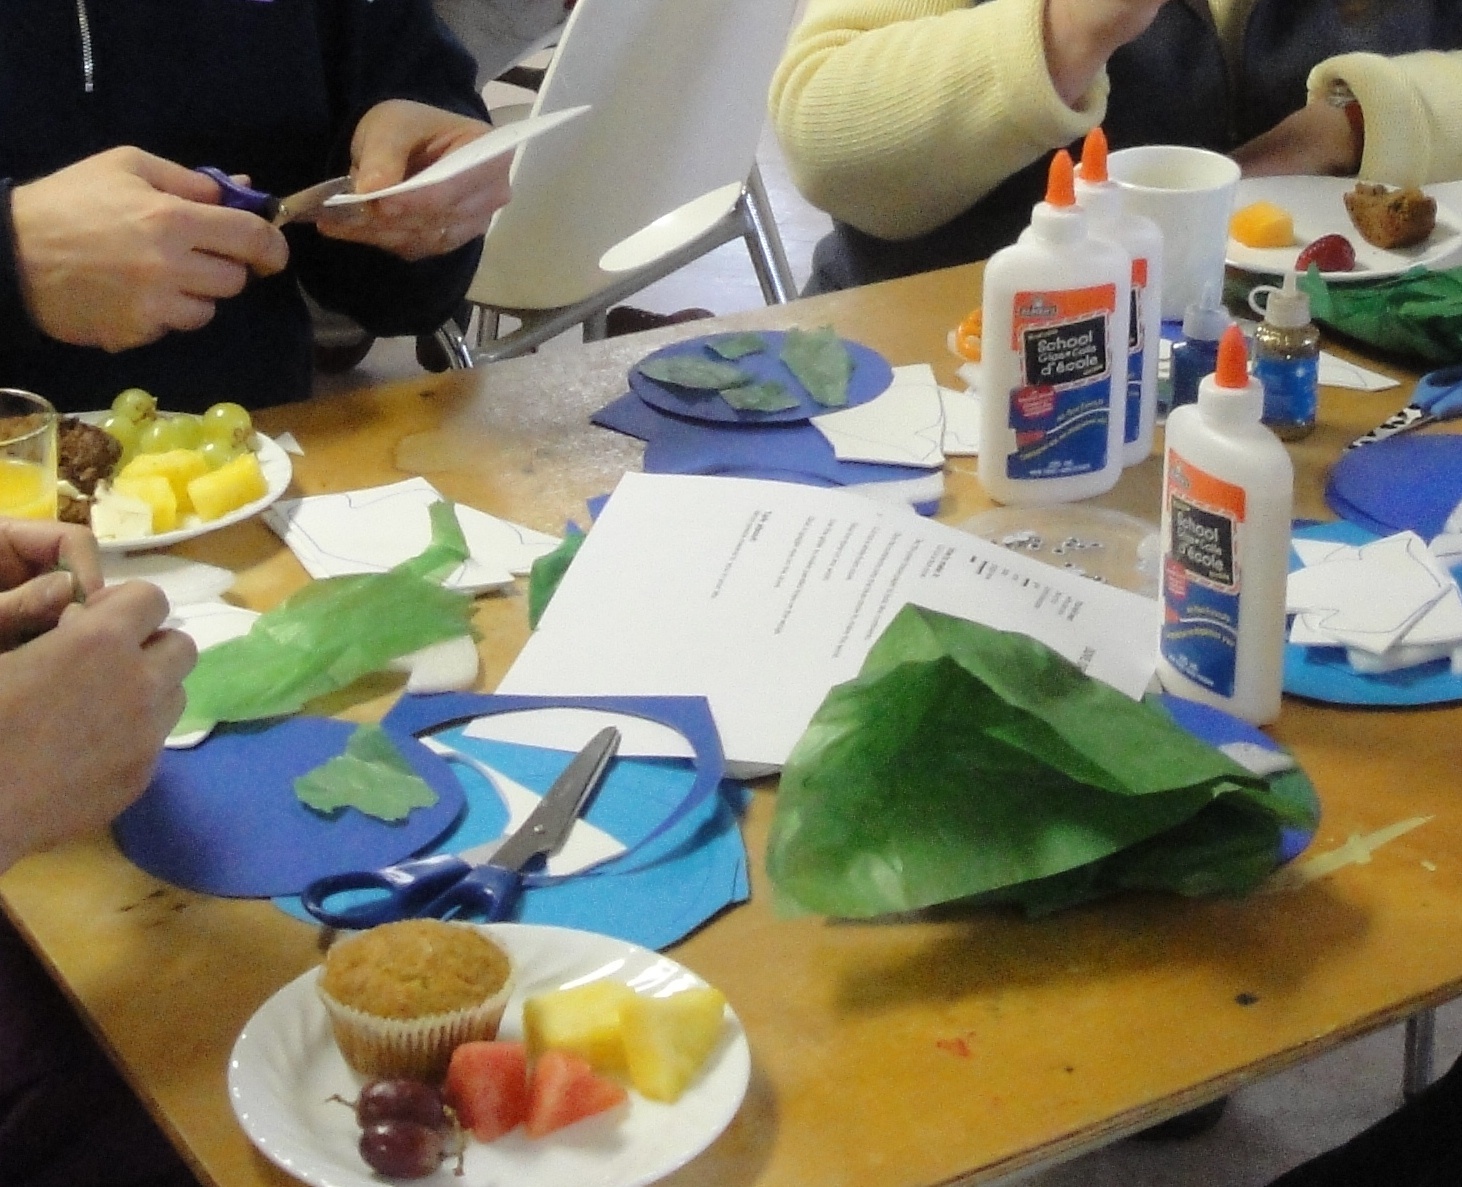 What is Messy Church Actually Accomplishing?